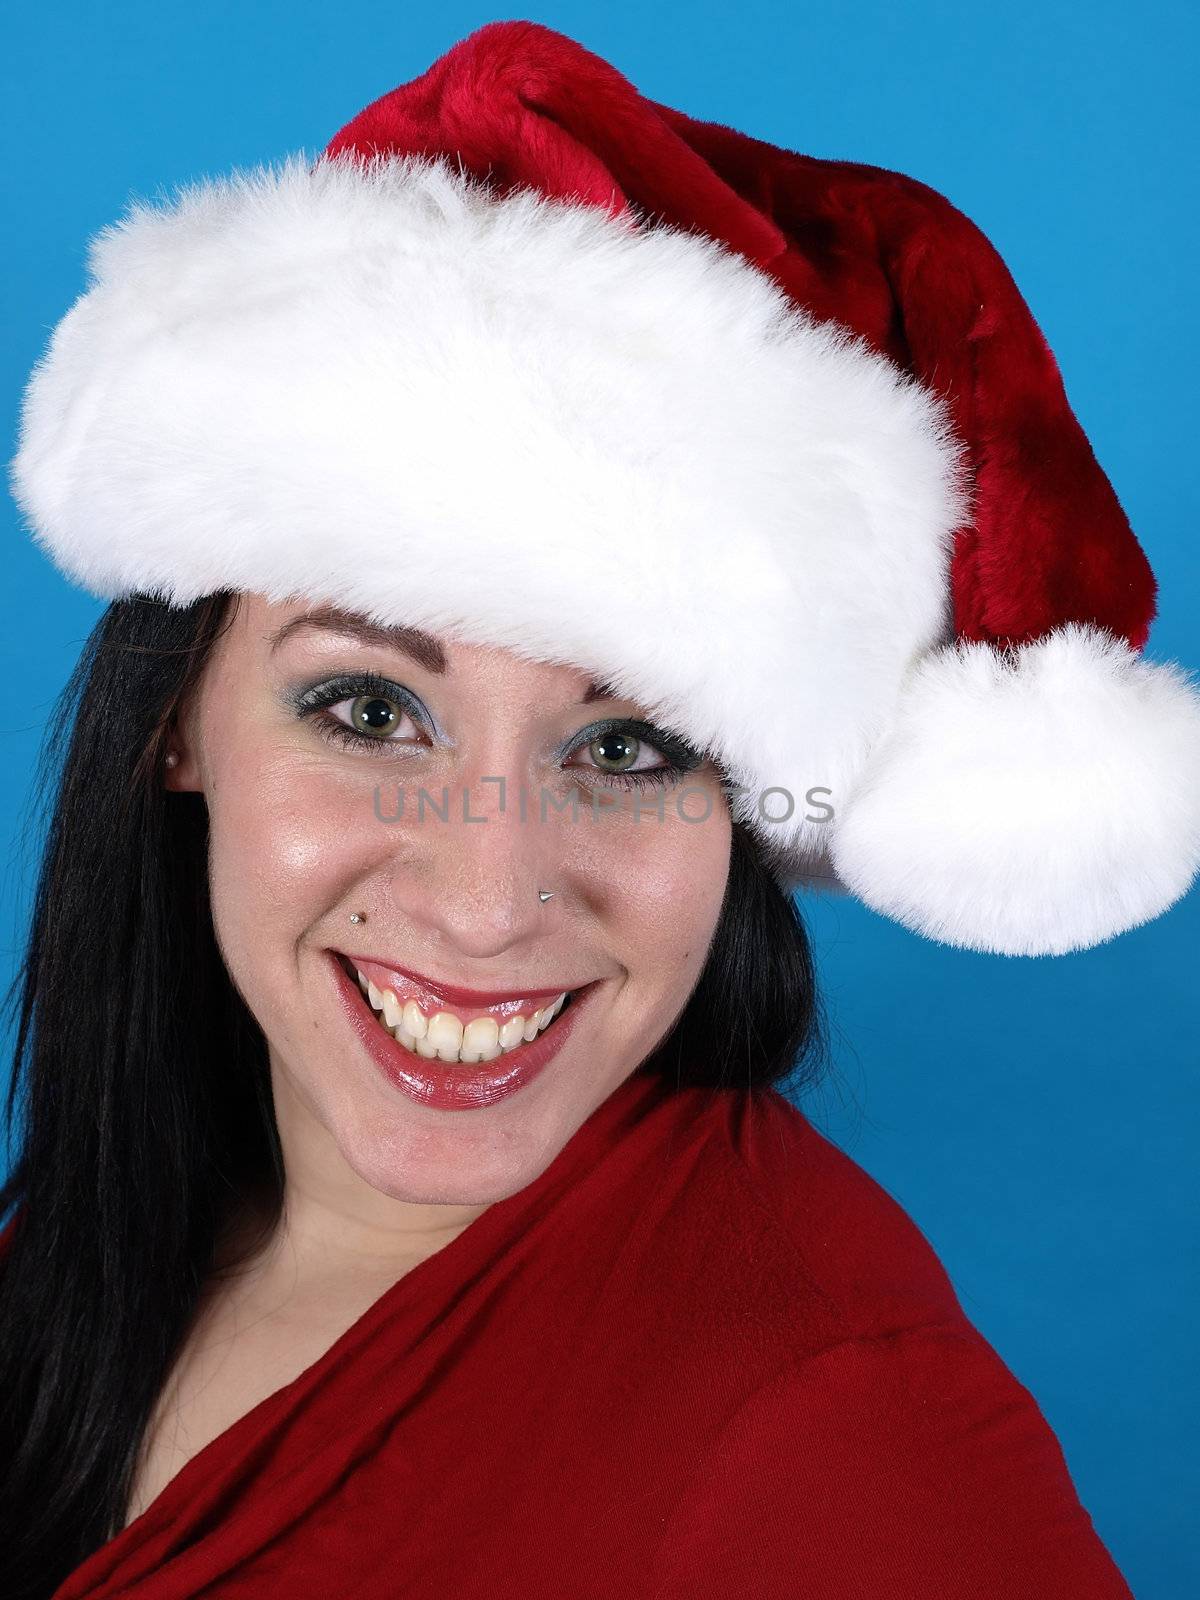 A pretty young pierced adult woman in a Santa hat cheerfully smiles.